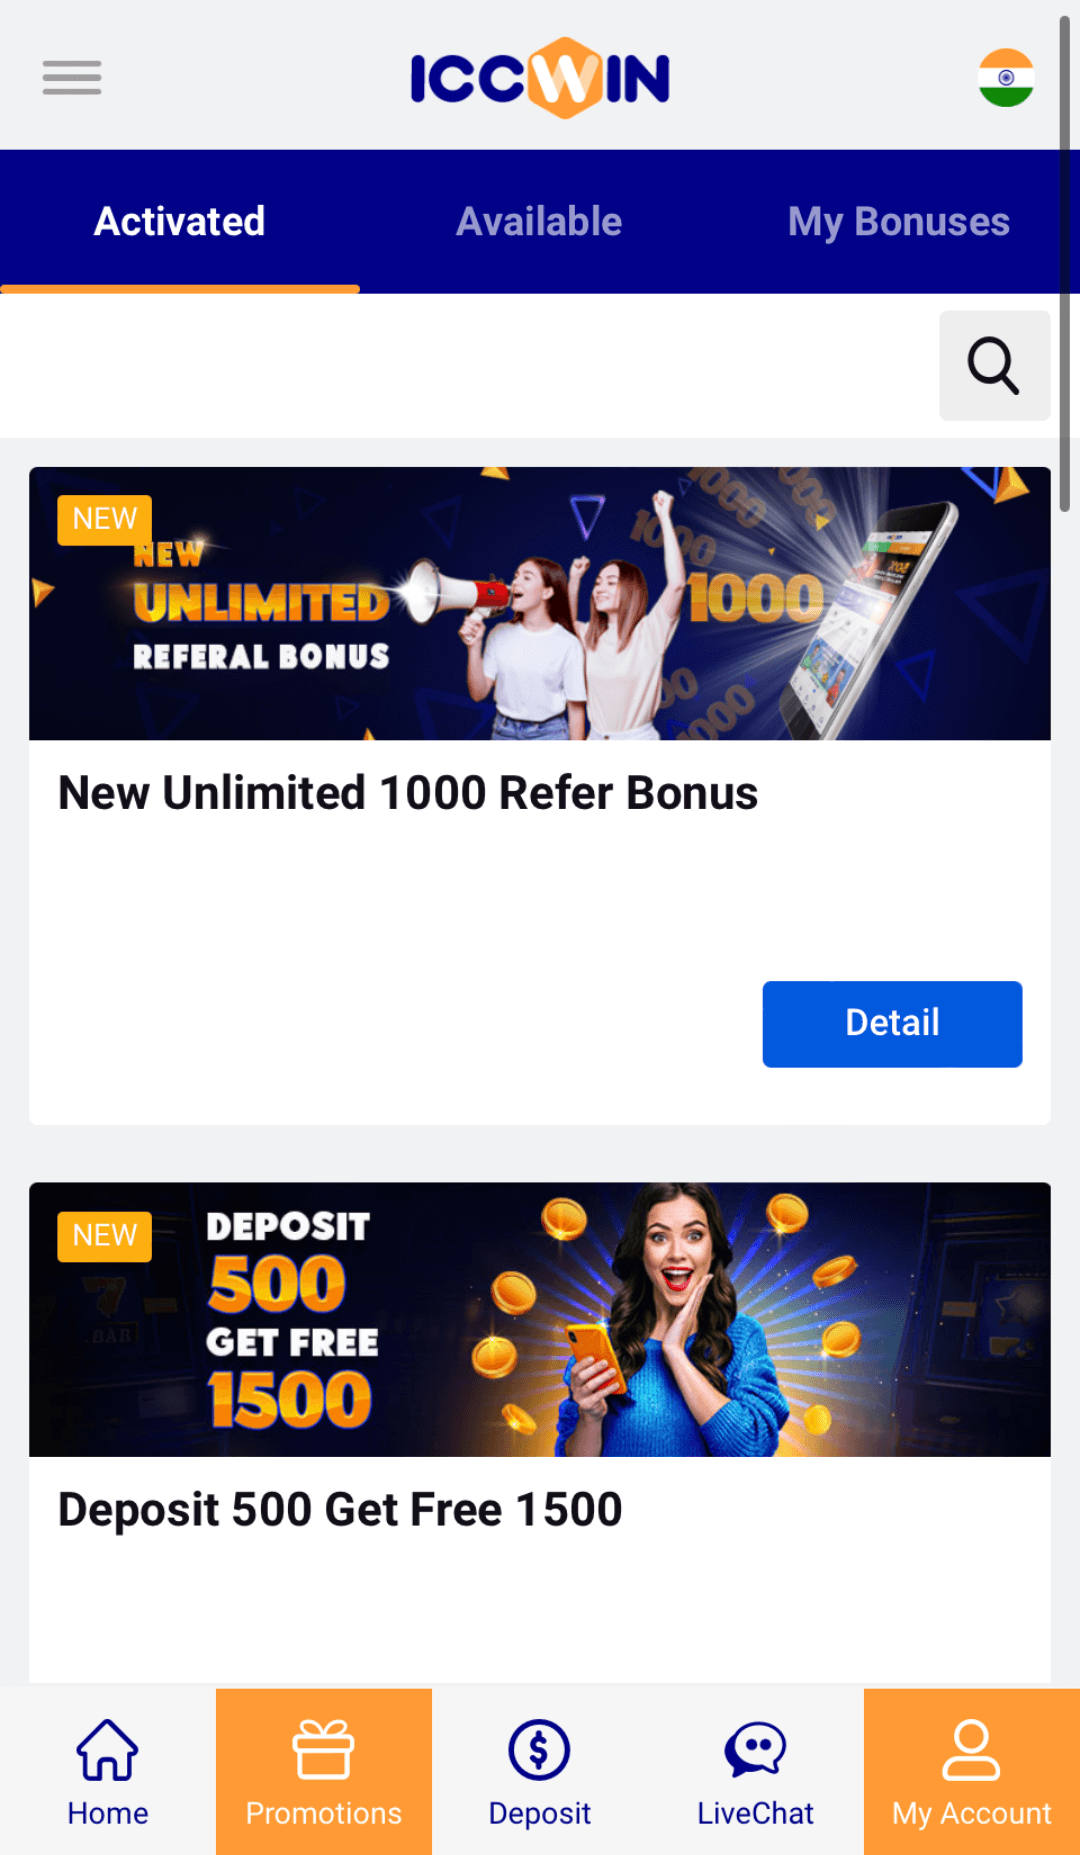 Screenshot of the promotions section in the ICCWIN app